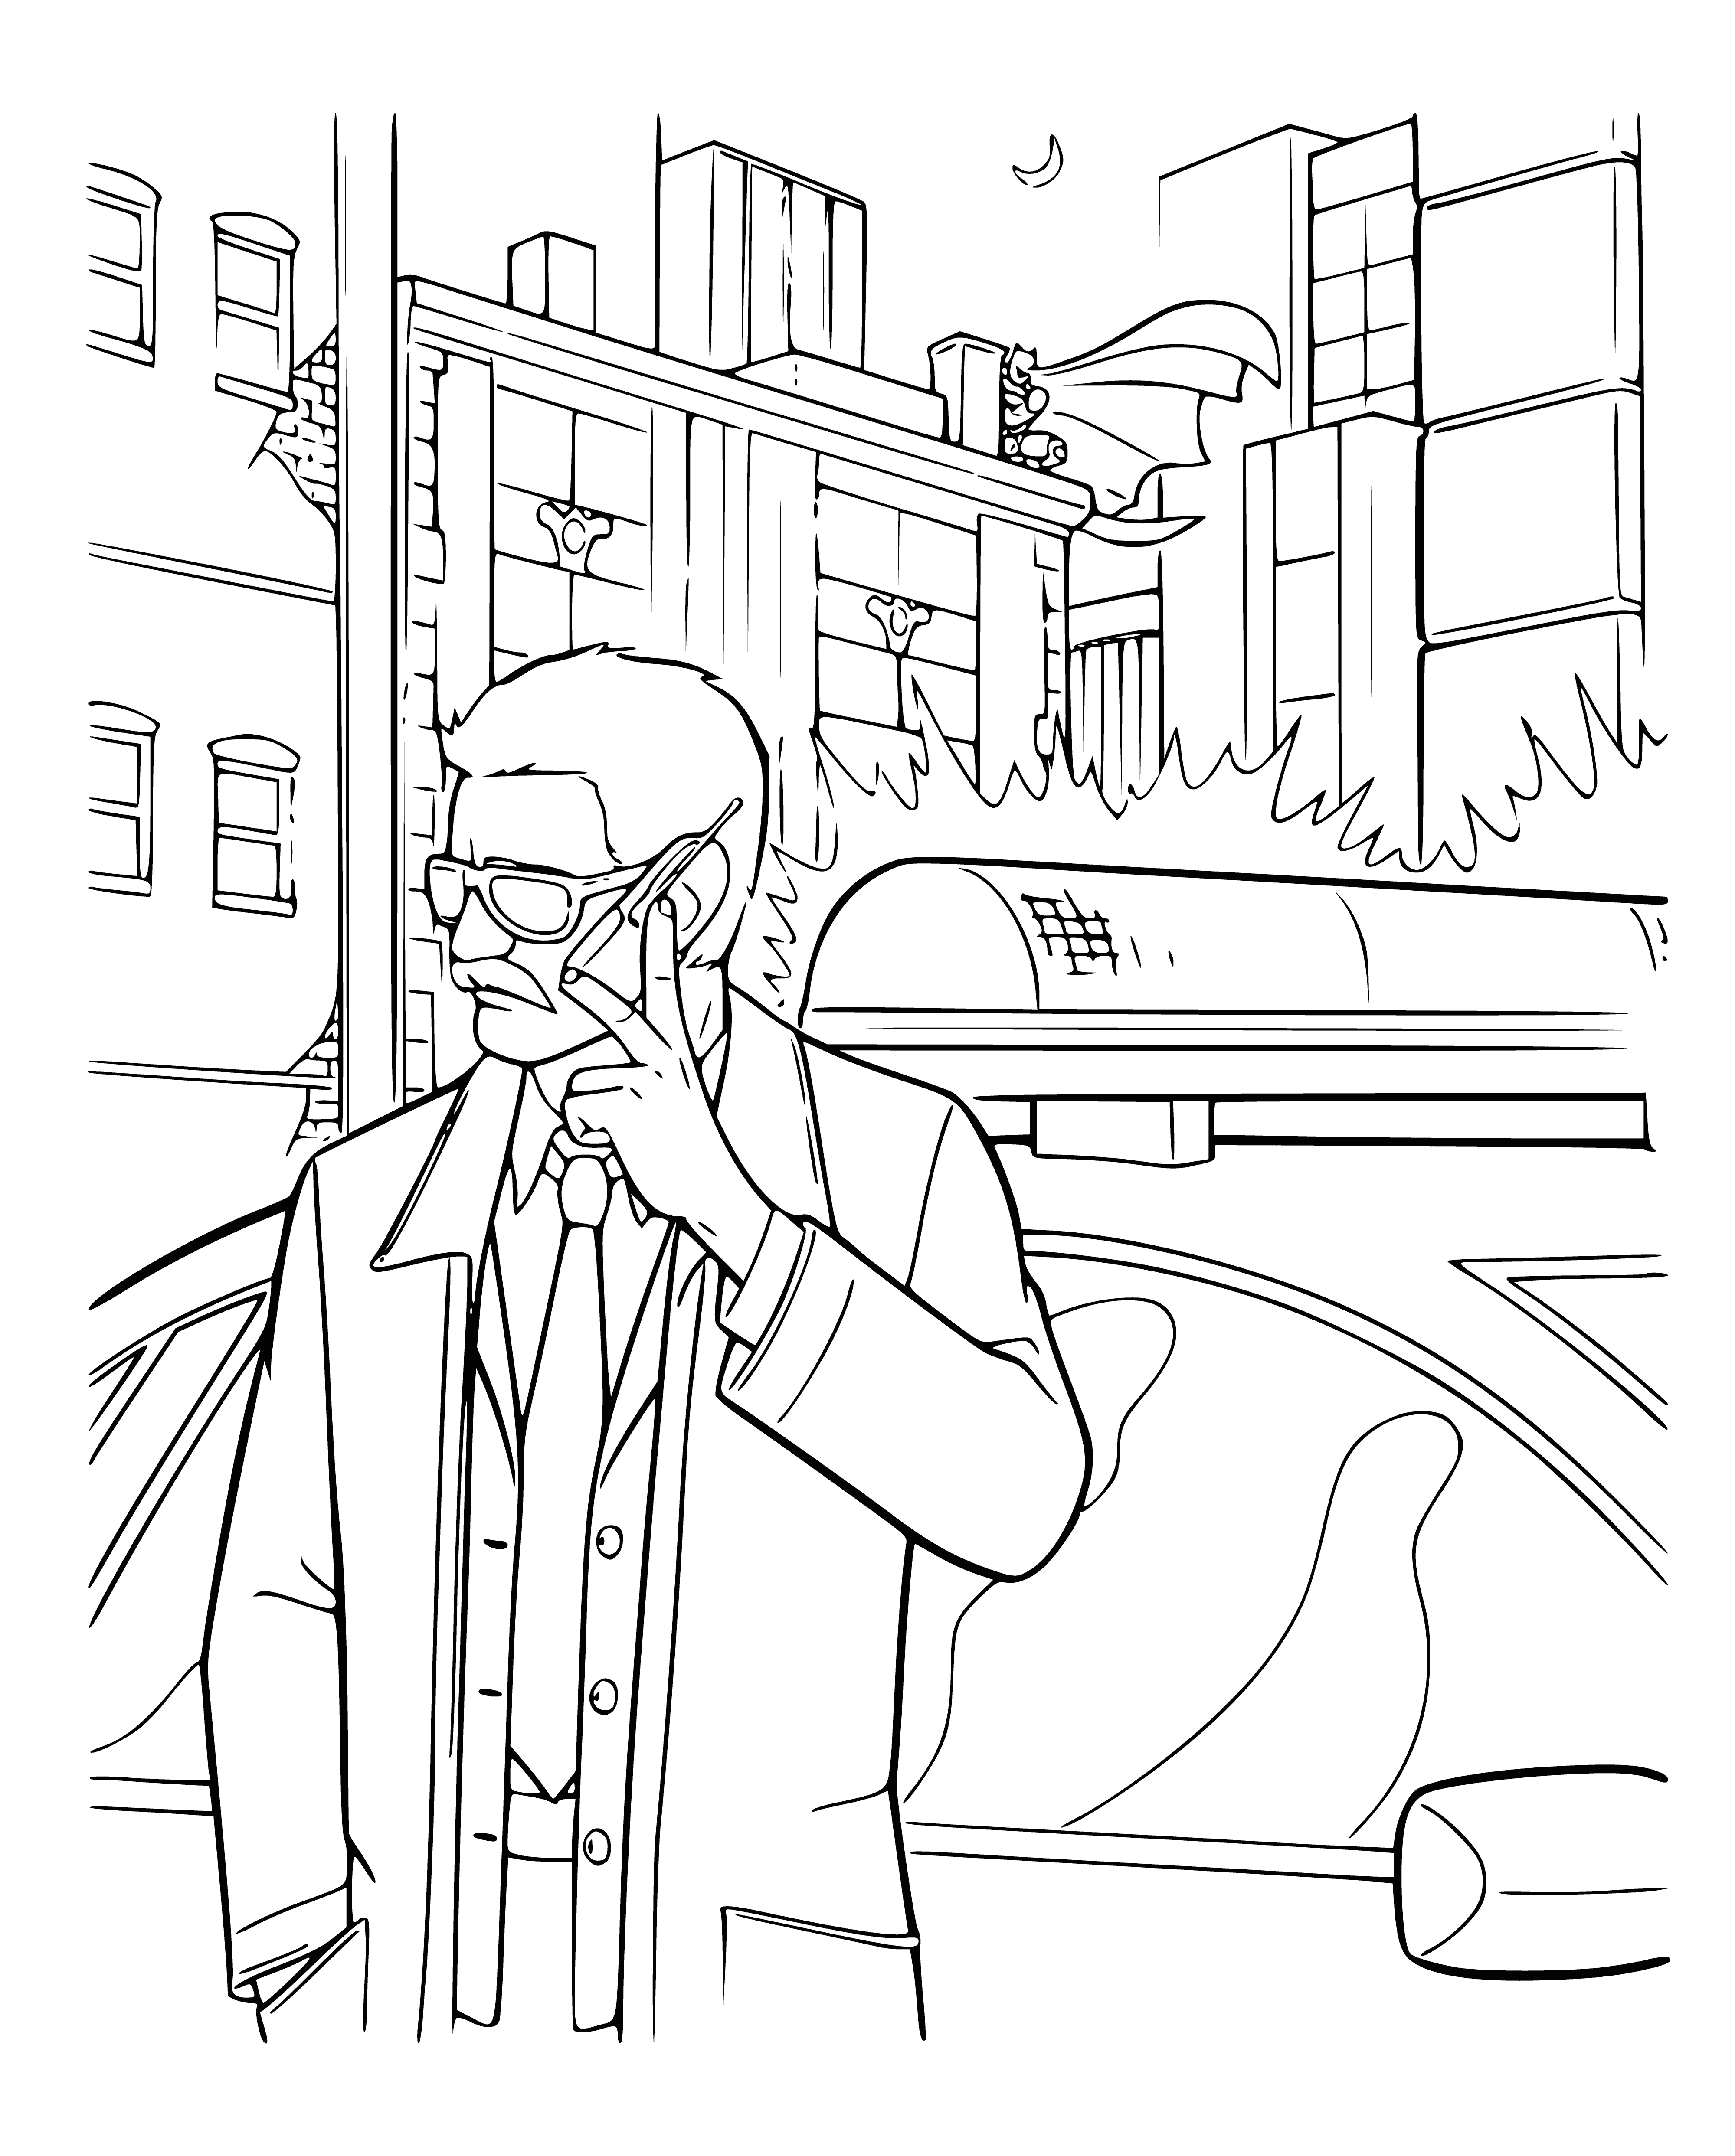 coloring page: Large, muscular man in a room scarred and shirtless, with a dark cape and mask. Holding a razor to shave.